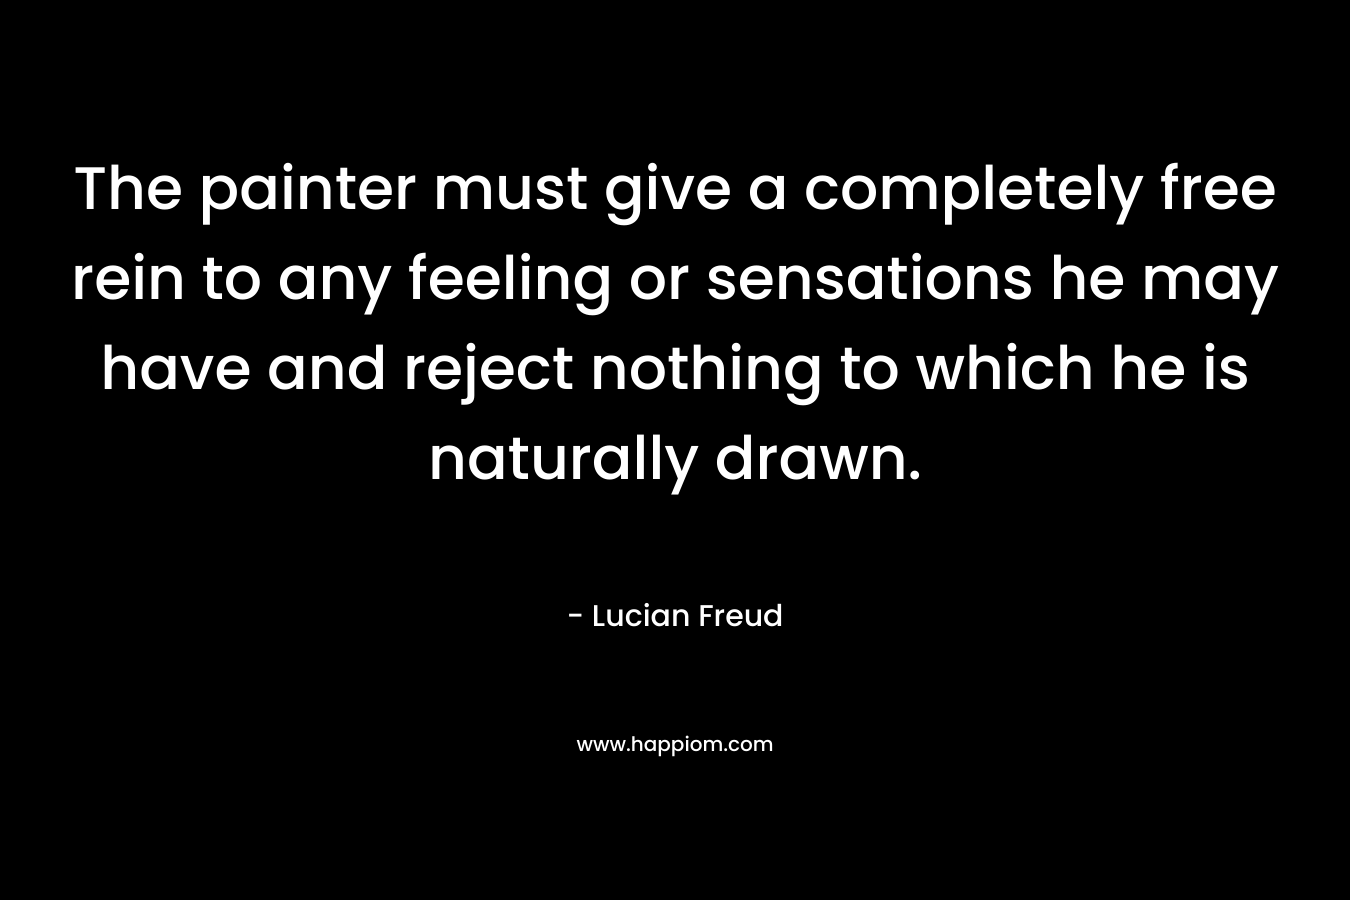 The painter must give a completely free rein to any feeling or sensations he may have and reject nothing to which he is naturally drawn.